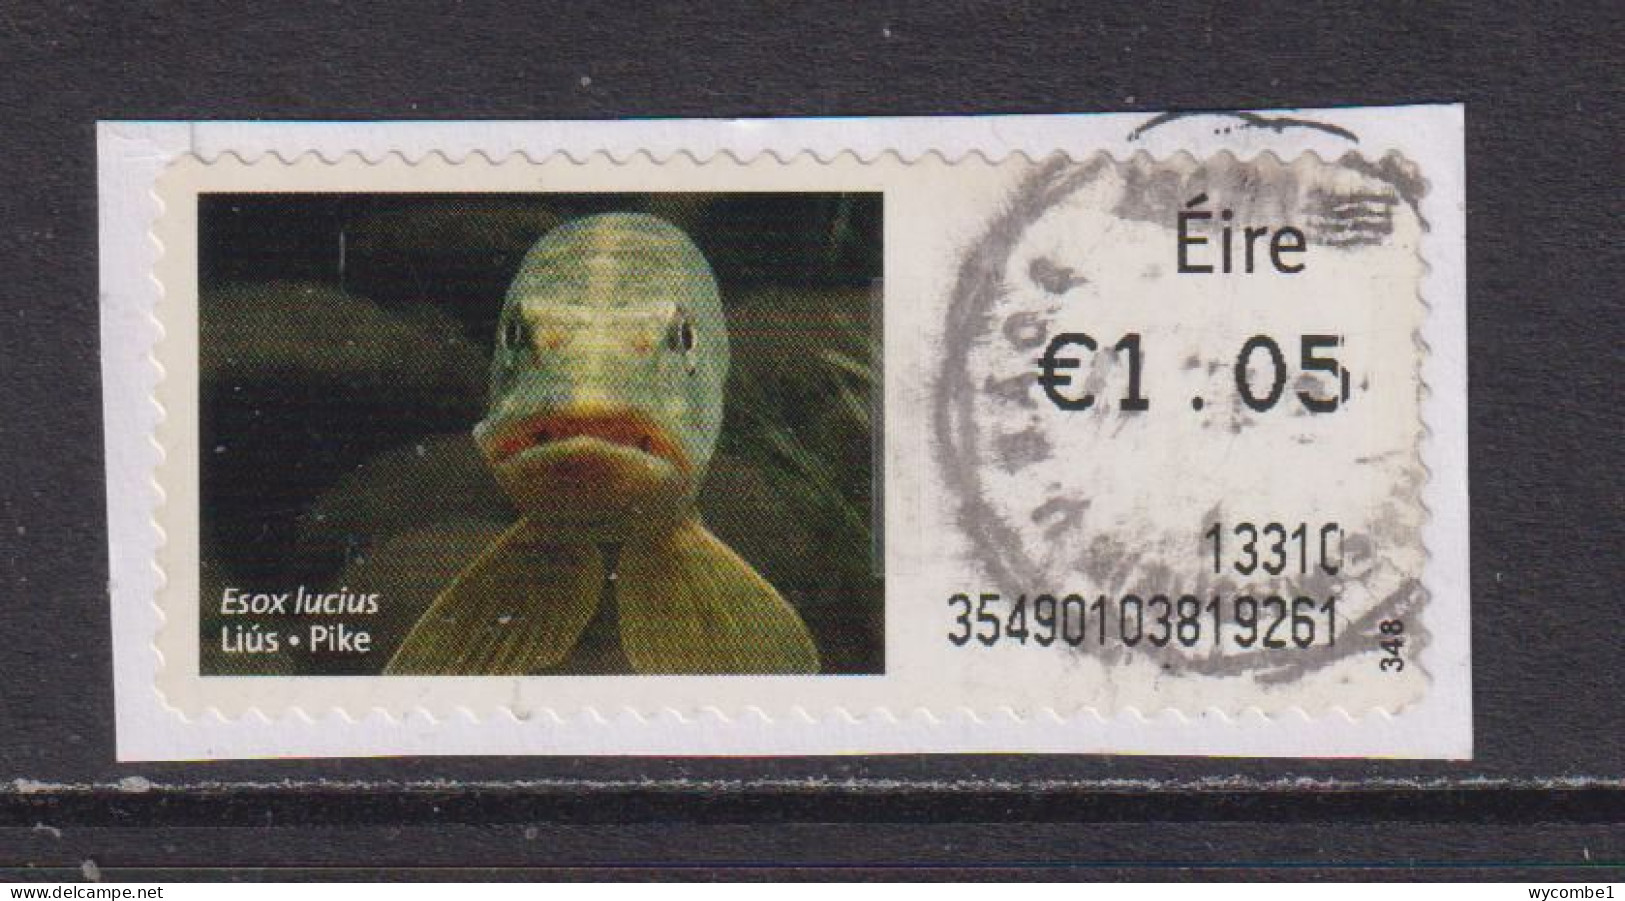 IRELAND  -  2012 Pike SOAR (Stamp On A Roll)  CDS  Used On Piece As Scan - Gebraucht